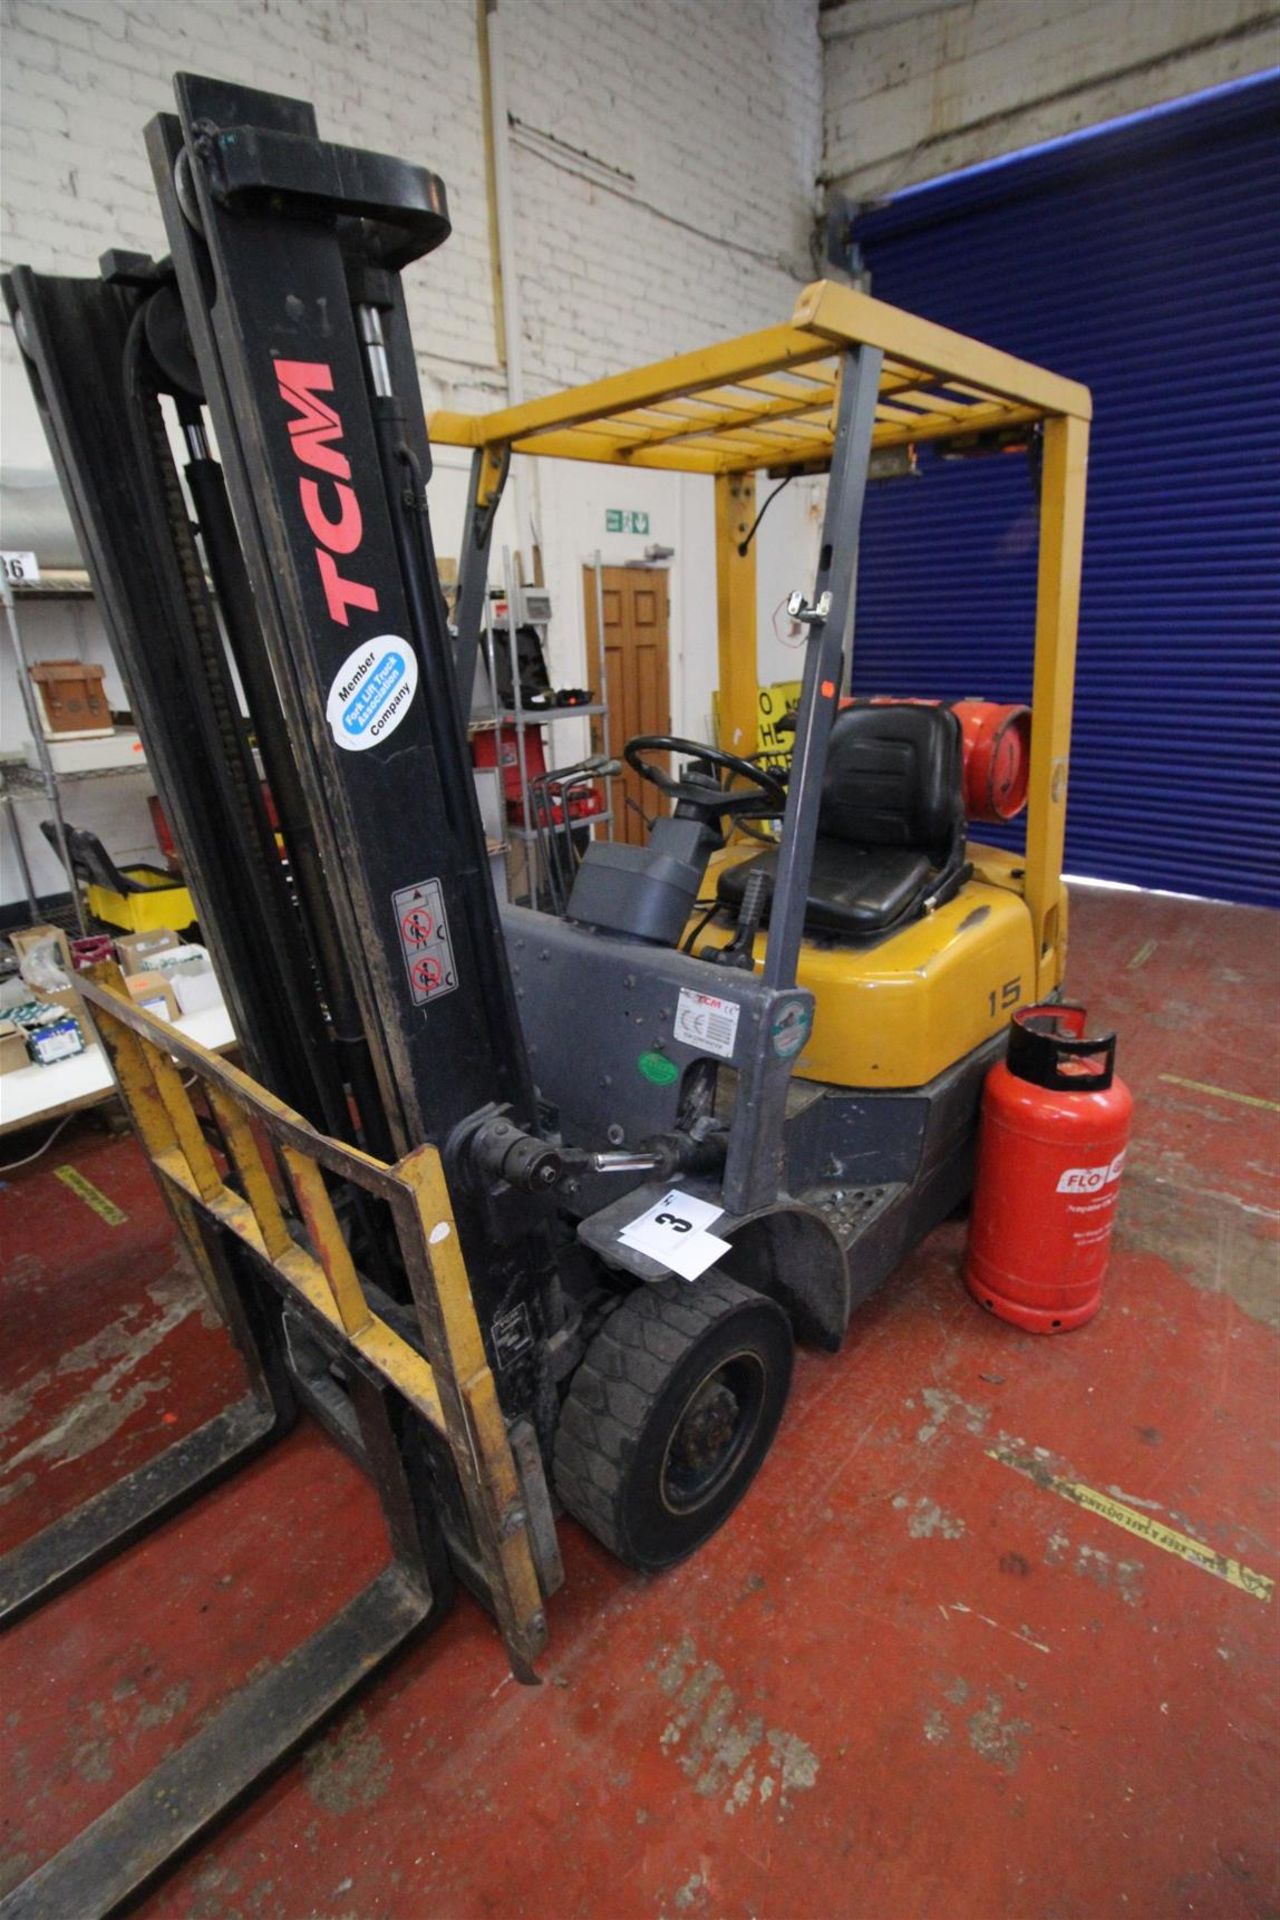 TCM LPG FUELLED MODEL FG15N8 (1.5TONNE CAPACITY) COUNTERBALANCE FORKLIFT TRUCK, SERIAL NO. 16N11450, - Image 3 of 3